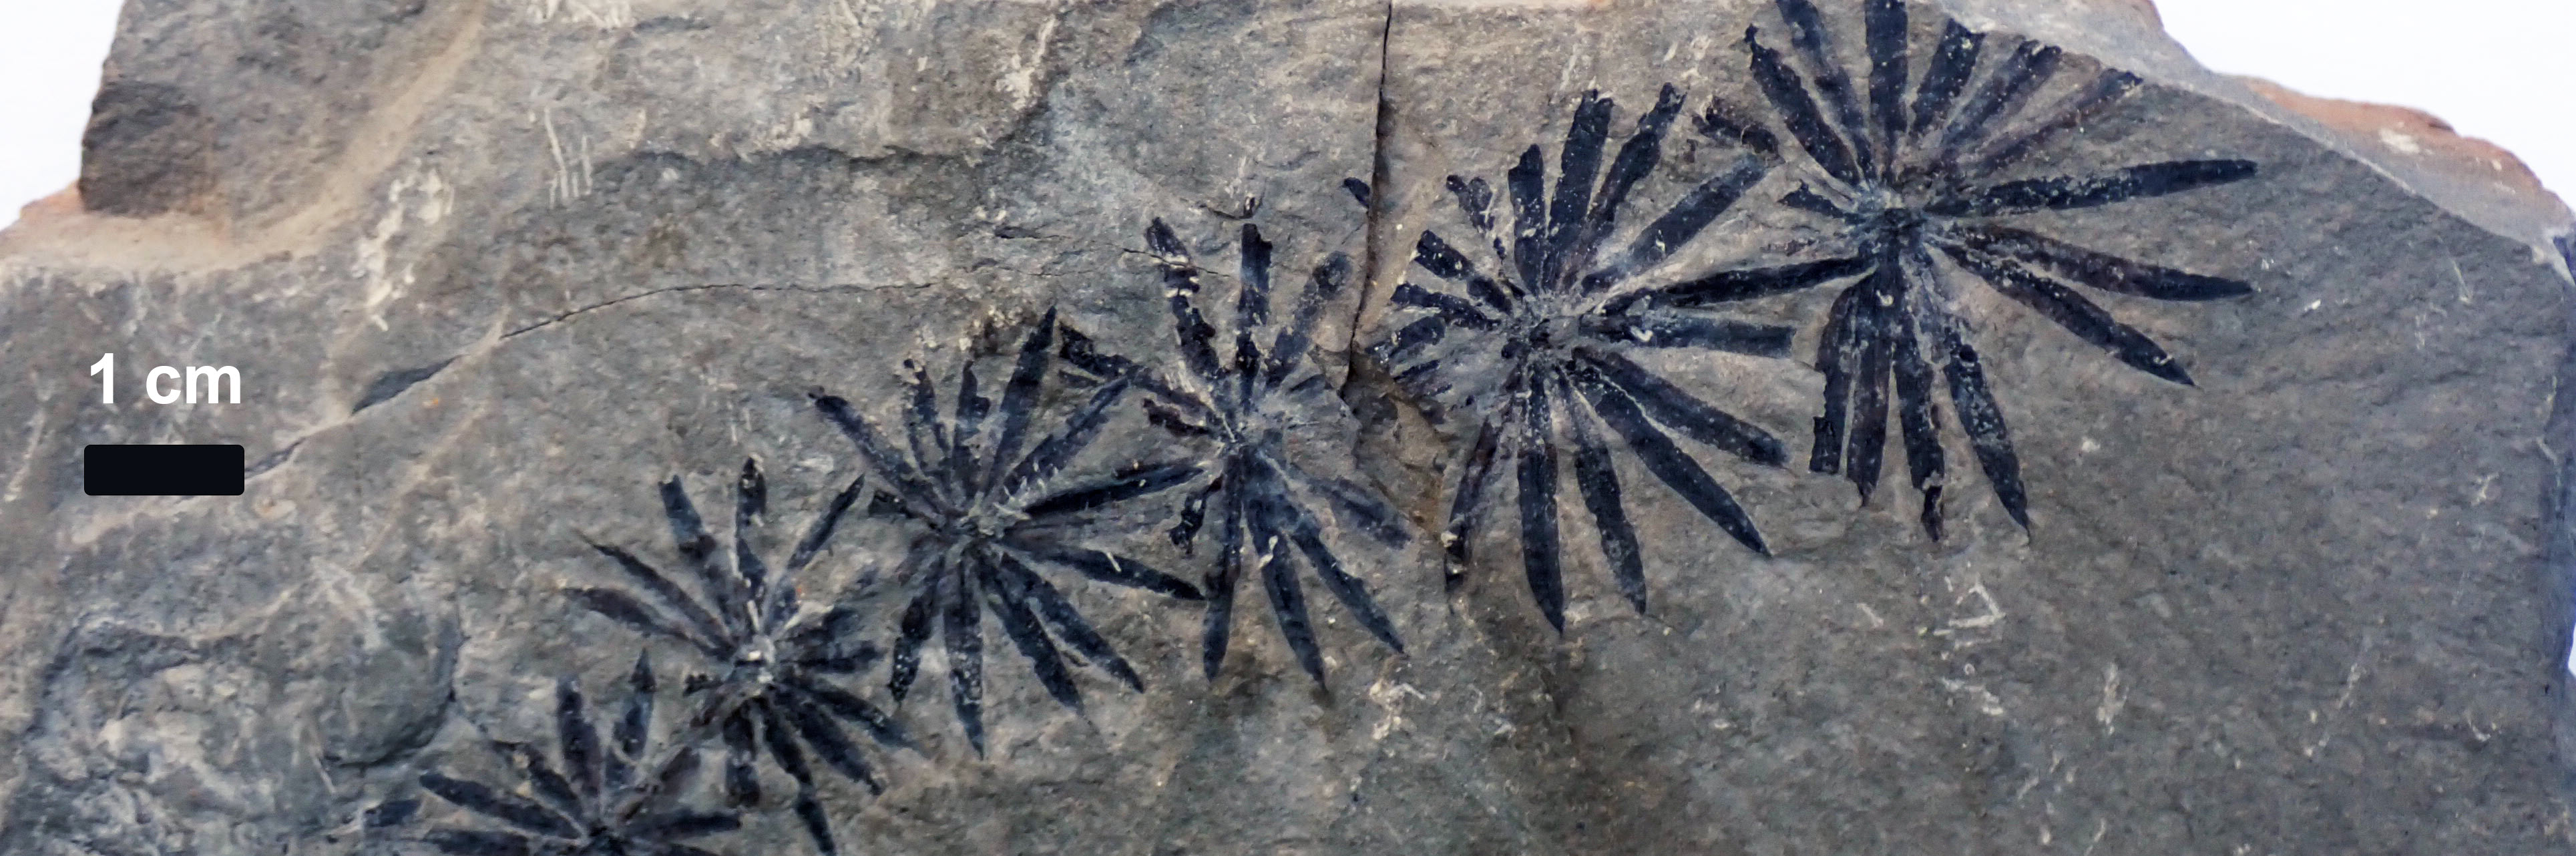 Annularia, one type of fossil leaf from Calamites plants